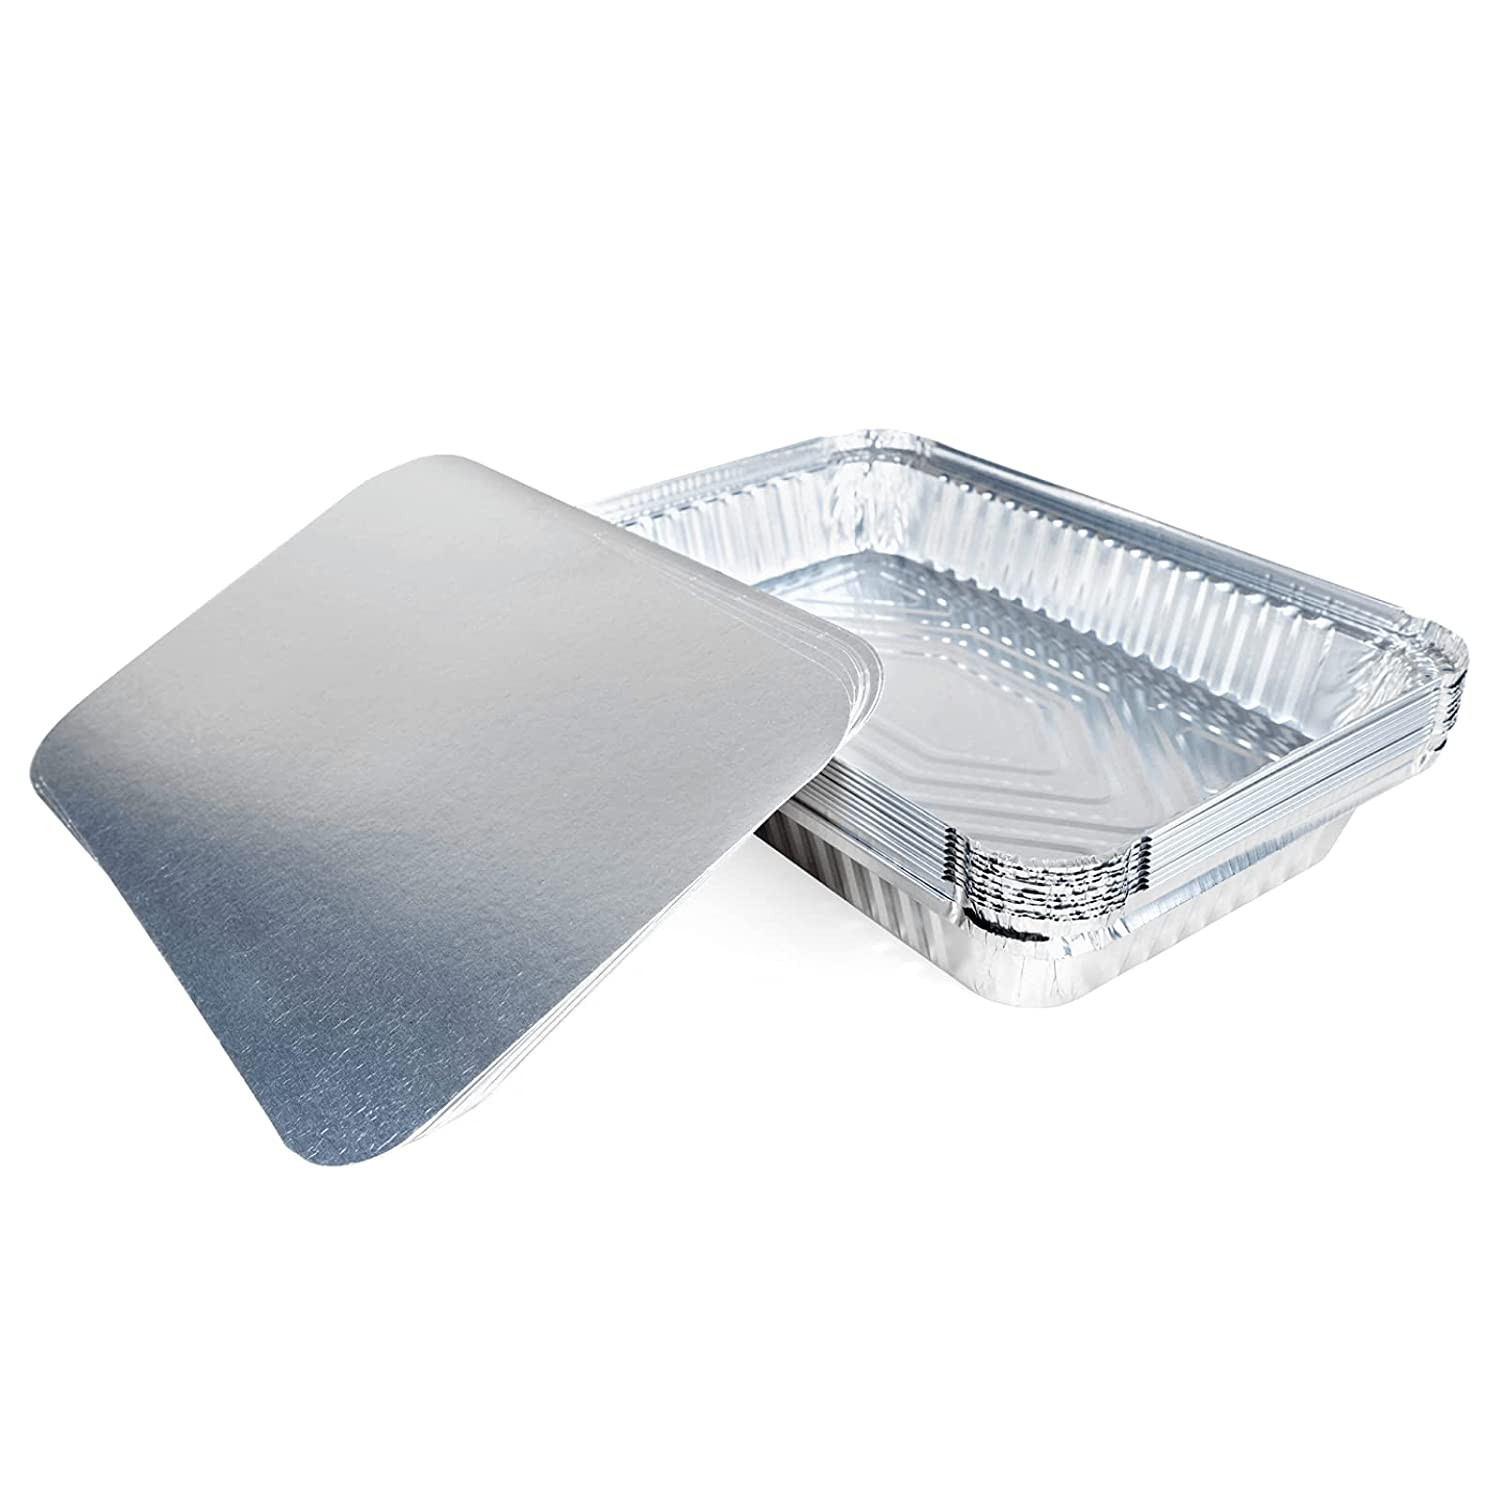 https://idlpack.com/image/cache/catalog/Products/Foil%20Pans%20and%20Trays/61f6sFuiobL._SL1500_-1500x1500.jpg